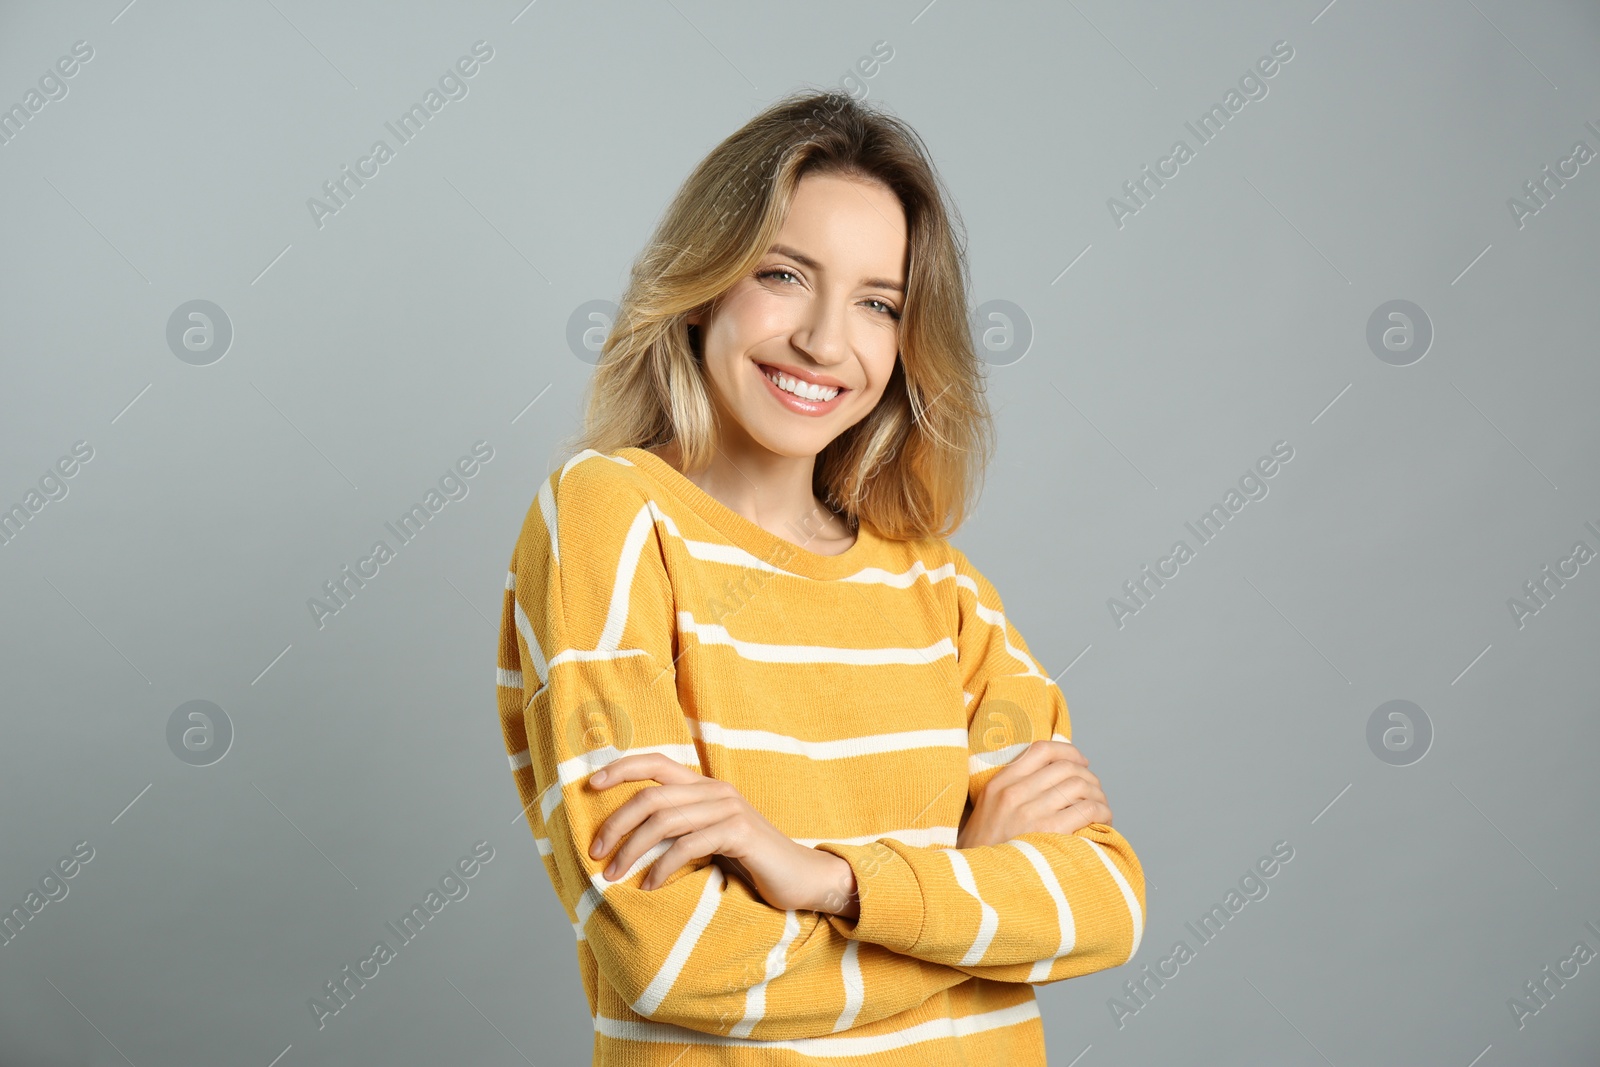 Photo of Portrait of happy young woman with beautiful blonde hair and charming smile on grey background